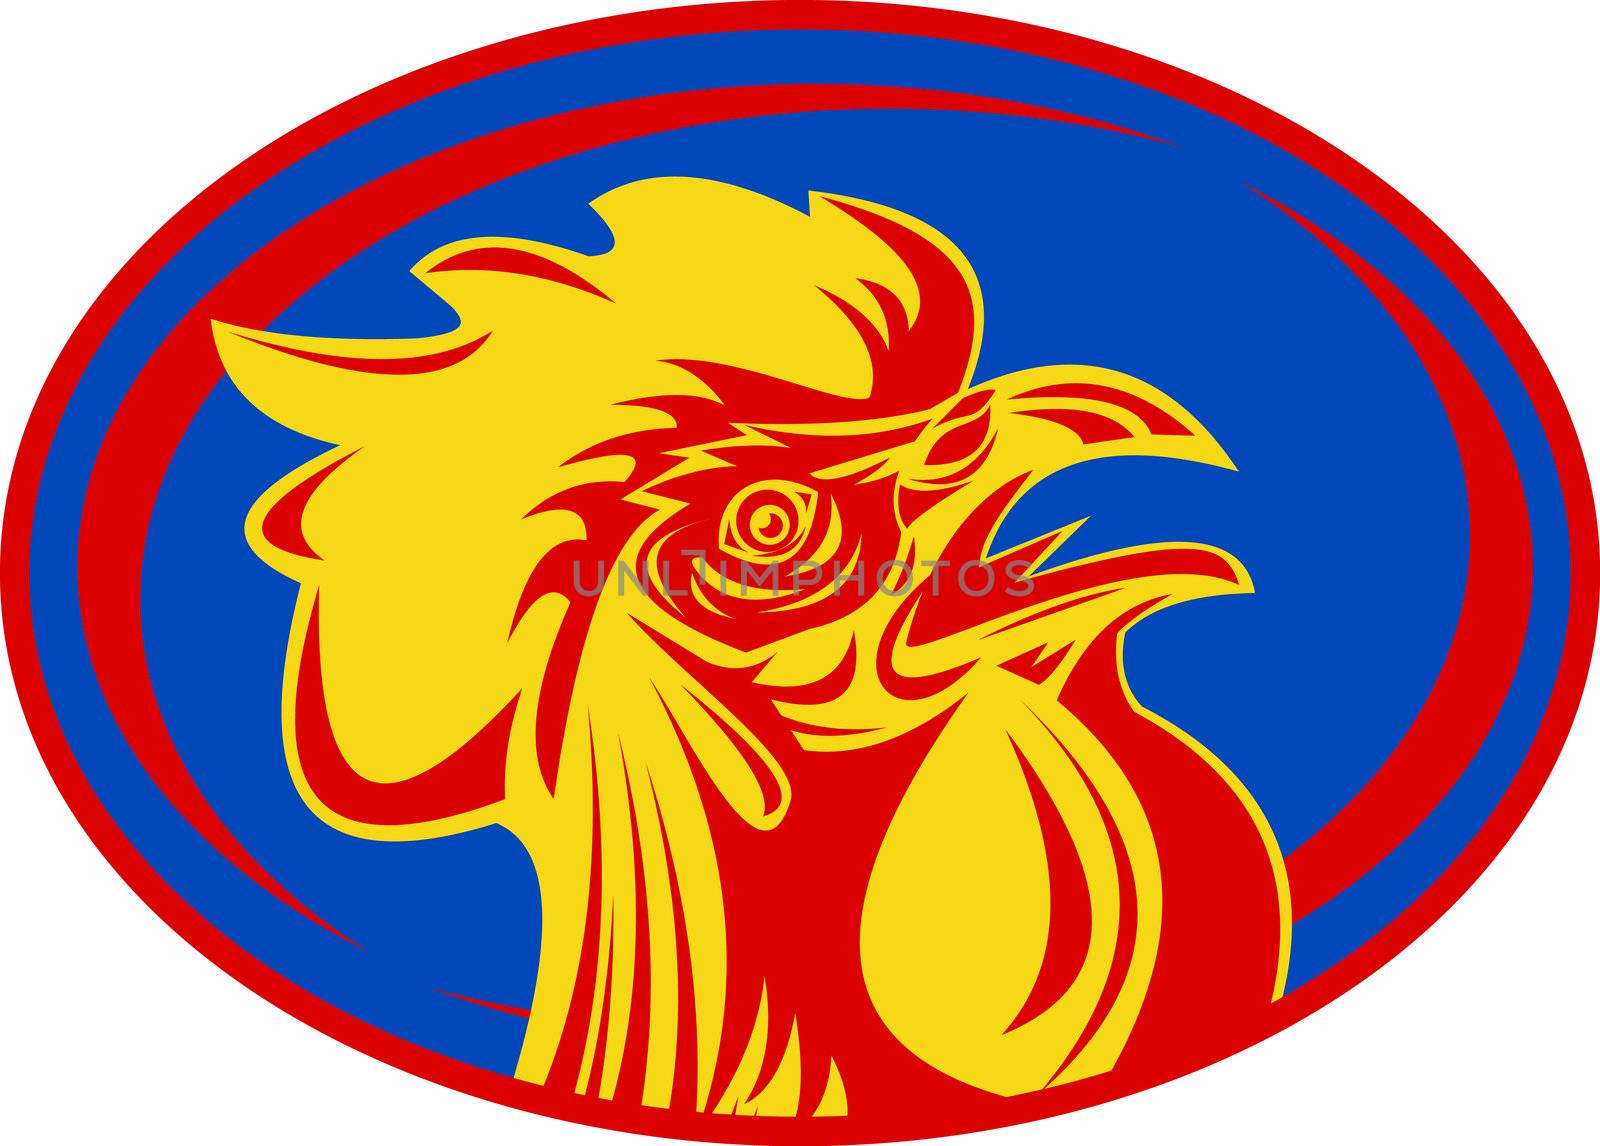 rugby rooster sports mascot france by patrimonio